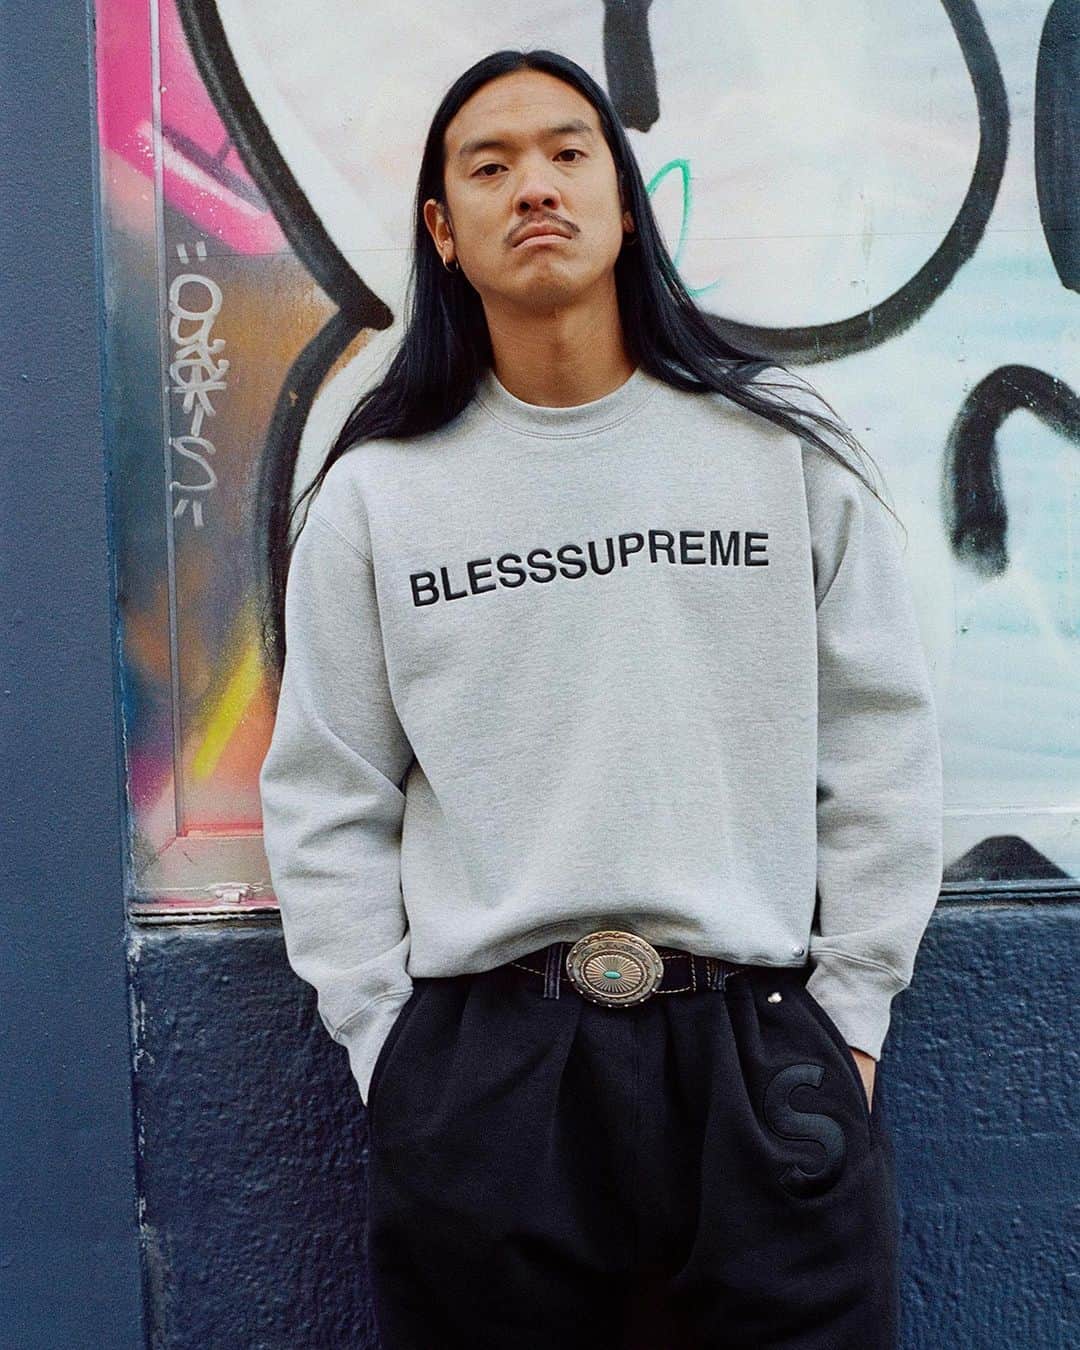 シュプリームさんのインスタグラム写真 - (シュプリームInstagram)「Supreme®/BLESS. 11/09/2023  BLESS is an interdisciplinary design studio established by Desiree Heiss and Ines Kaag in 1995. Based in Berlin and Paris, BLESS has honed an experimental approach to imagining clothing, accessories, furniture and objects for everyday life. BLESS often incorporates recycled textiles and materials, as well as employs unorthodox craft techniques in its development of functional design.   Heiss and Kaag first met in Paris as design students. Without having fully established their label, the pair placed an ad in i-D Magazine featuring a wig they’d created. Colette’s Sarah Andelman responded to the ad, as did a Maison Margiela PR. This lead to BLESS’s first product — the N°00 fur wig, made using vintage fur coats — which appeared in Maison Margiela’s FW97 runway show. Over the following decades, BLESS has released over 70 collections of forward-thinking clothing and objects, often encouraging active engagement among its consumers. These have included BLESS N°06, a package containing all of the materials to create a shoe; and BLESS N°57, a t-shirt made out of cardboard look-alike fabric.  An excerpt from Heiss and Kaag's 1996 manifesto:   "BLESS is found in magazines and can be contacted personally by phone. Everything except sex is available by request. BLESS is interactive — those that dare can take part in the permanent renewal of the BLESS world. BLESS allows you to recognize needs at an early state. BLESS works against mass individuality and its hidden dangers i.e. fashion overkill. BLESS is a project that presents ideal and artistic values by products to the public. BLESS is a visionary substitute to make the near future worth living for."   Supreme has worked with BLESS on a new collection for 2023. The collection consists of a Down Puffer Jacket, Sweatpant Jean, Crewneck, T-Shirt, Skateboard and mophie® Charging Cable.   BLESS will develop a new line of products with these materials, to be released in the future.   Available November 9th.  Available in Japan and Seoul November 11th.」11月7日 23時00分 - supremenewyork